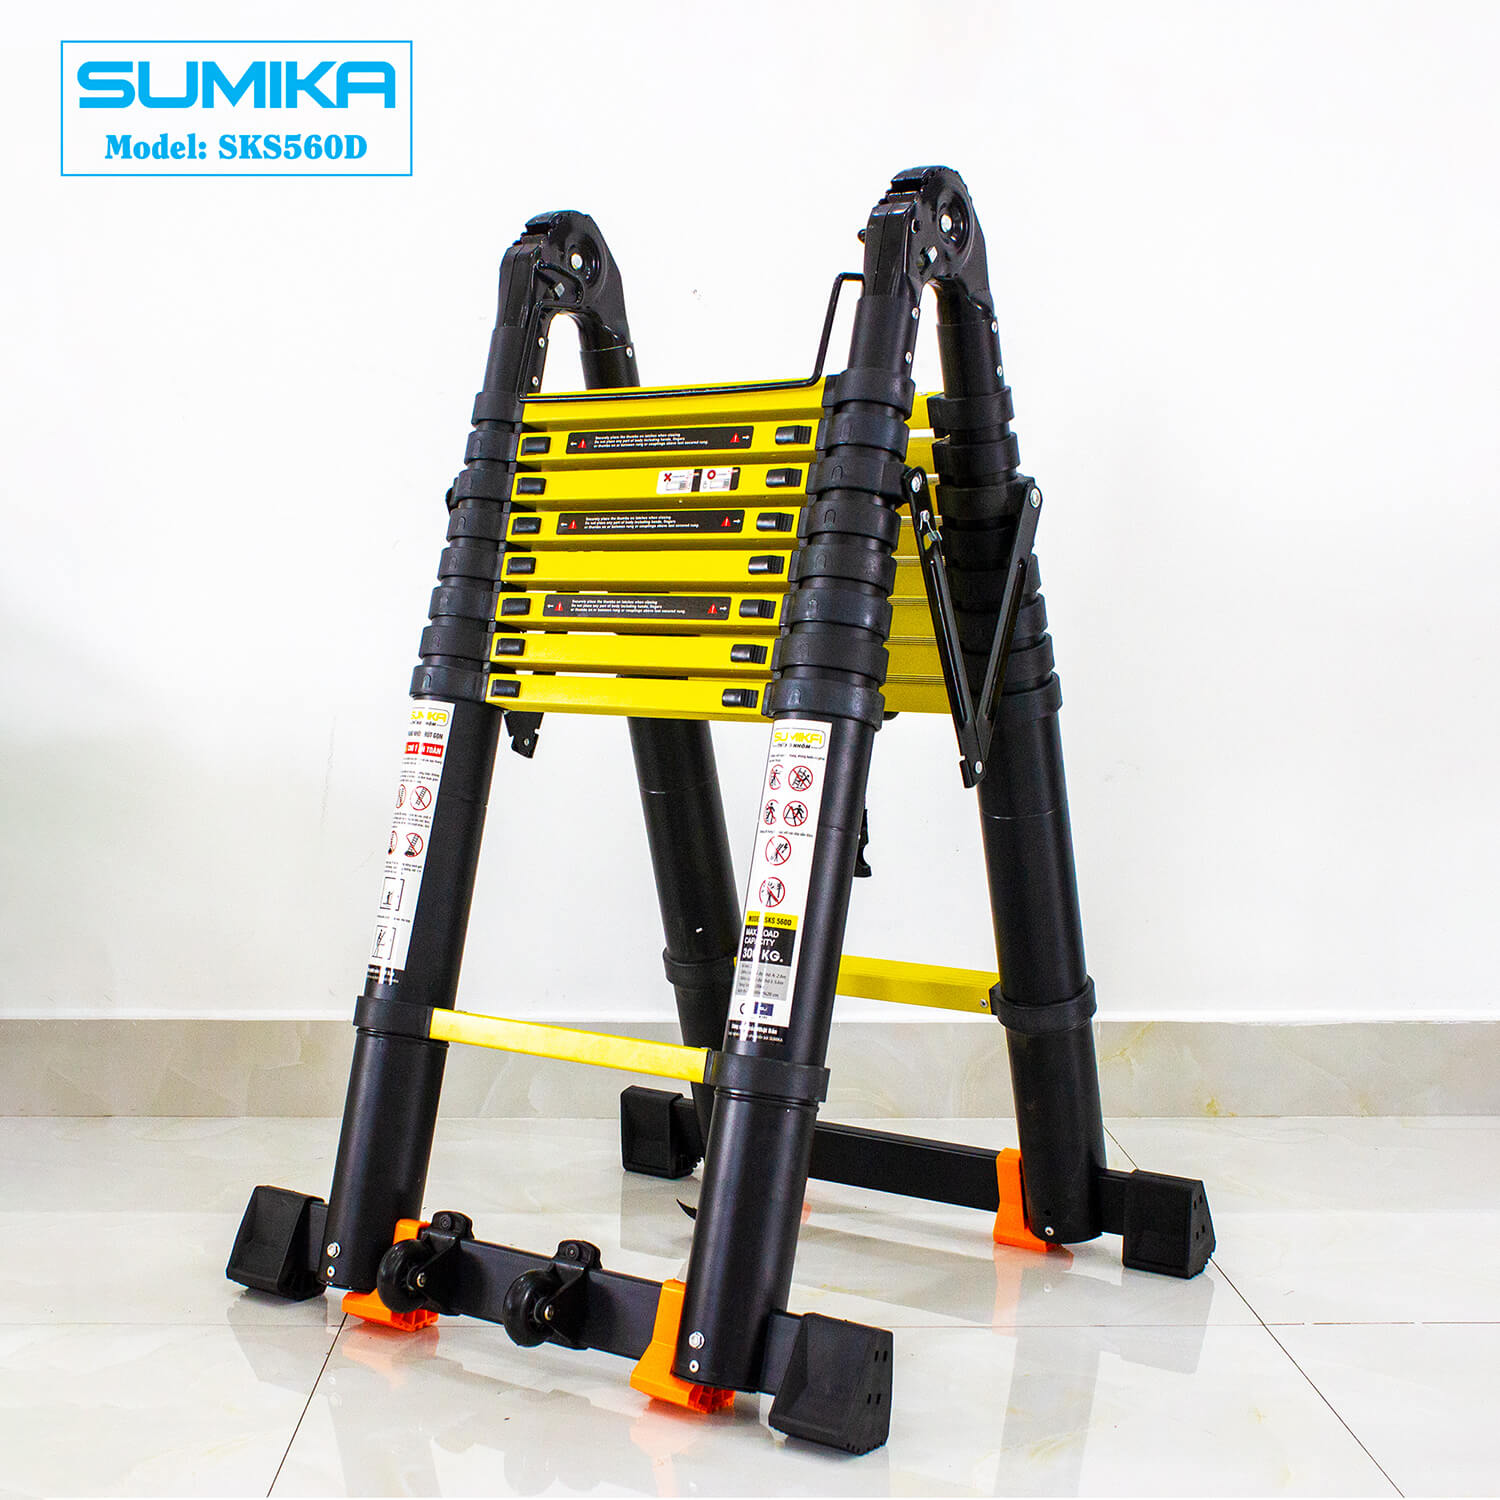 Sumika SKS560D double with aluminum